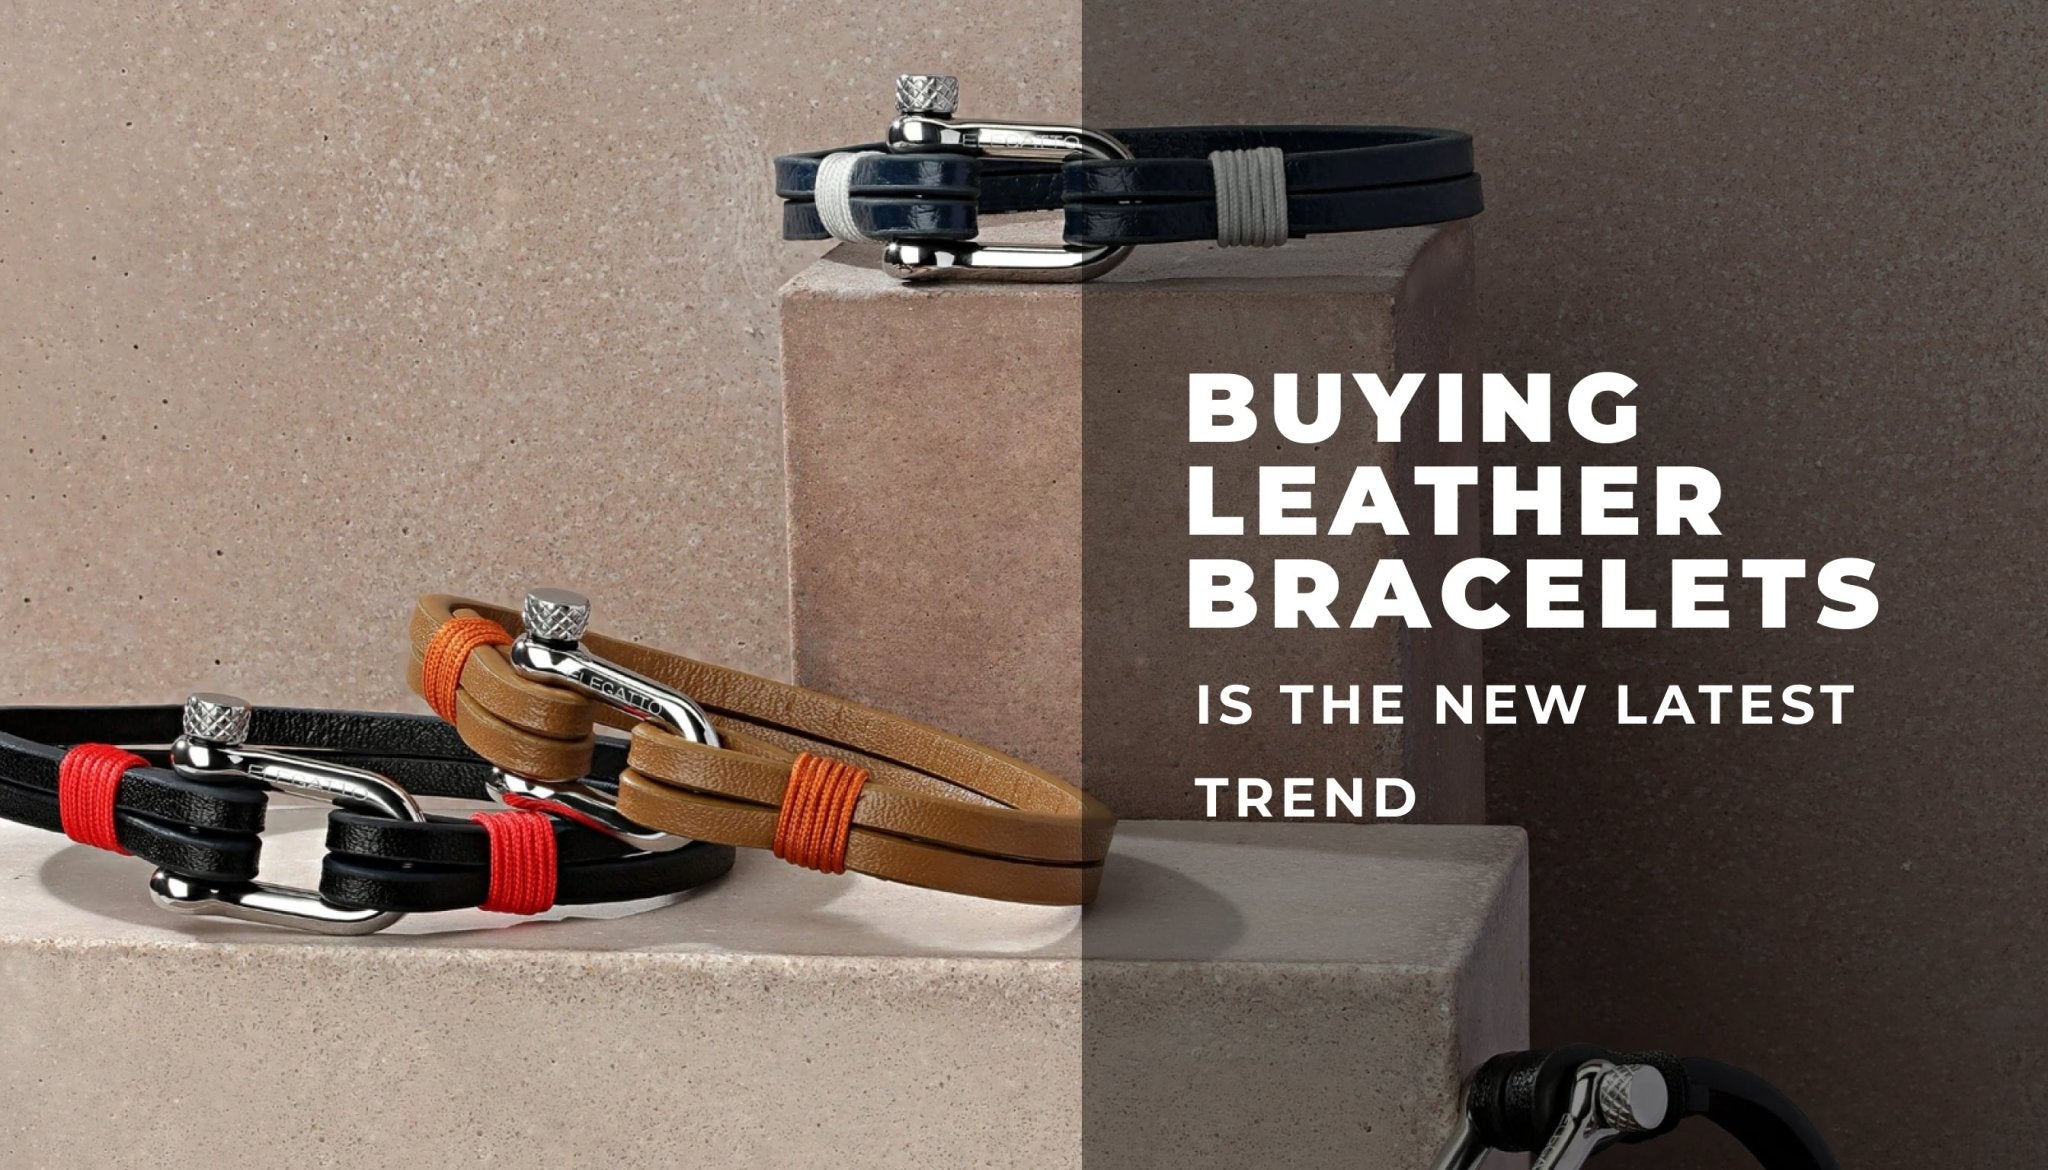 Buying Leather Bracelets is the Latest Jewelry Trend - Elegatto